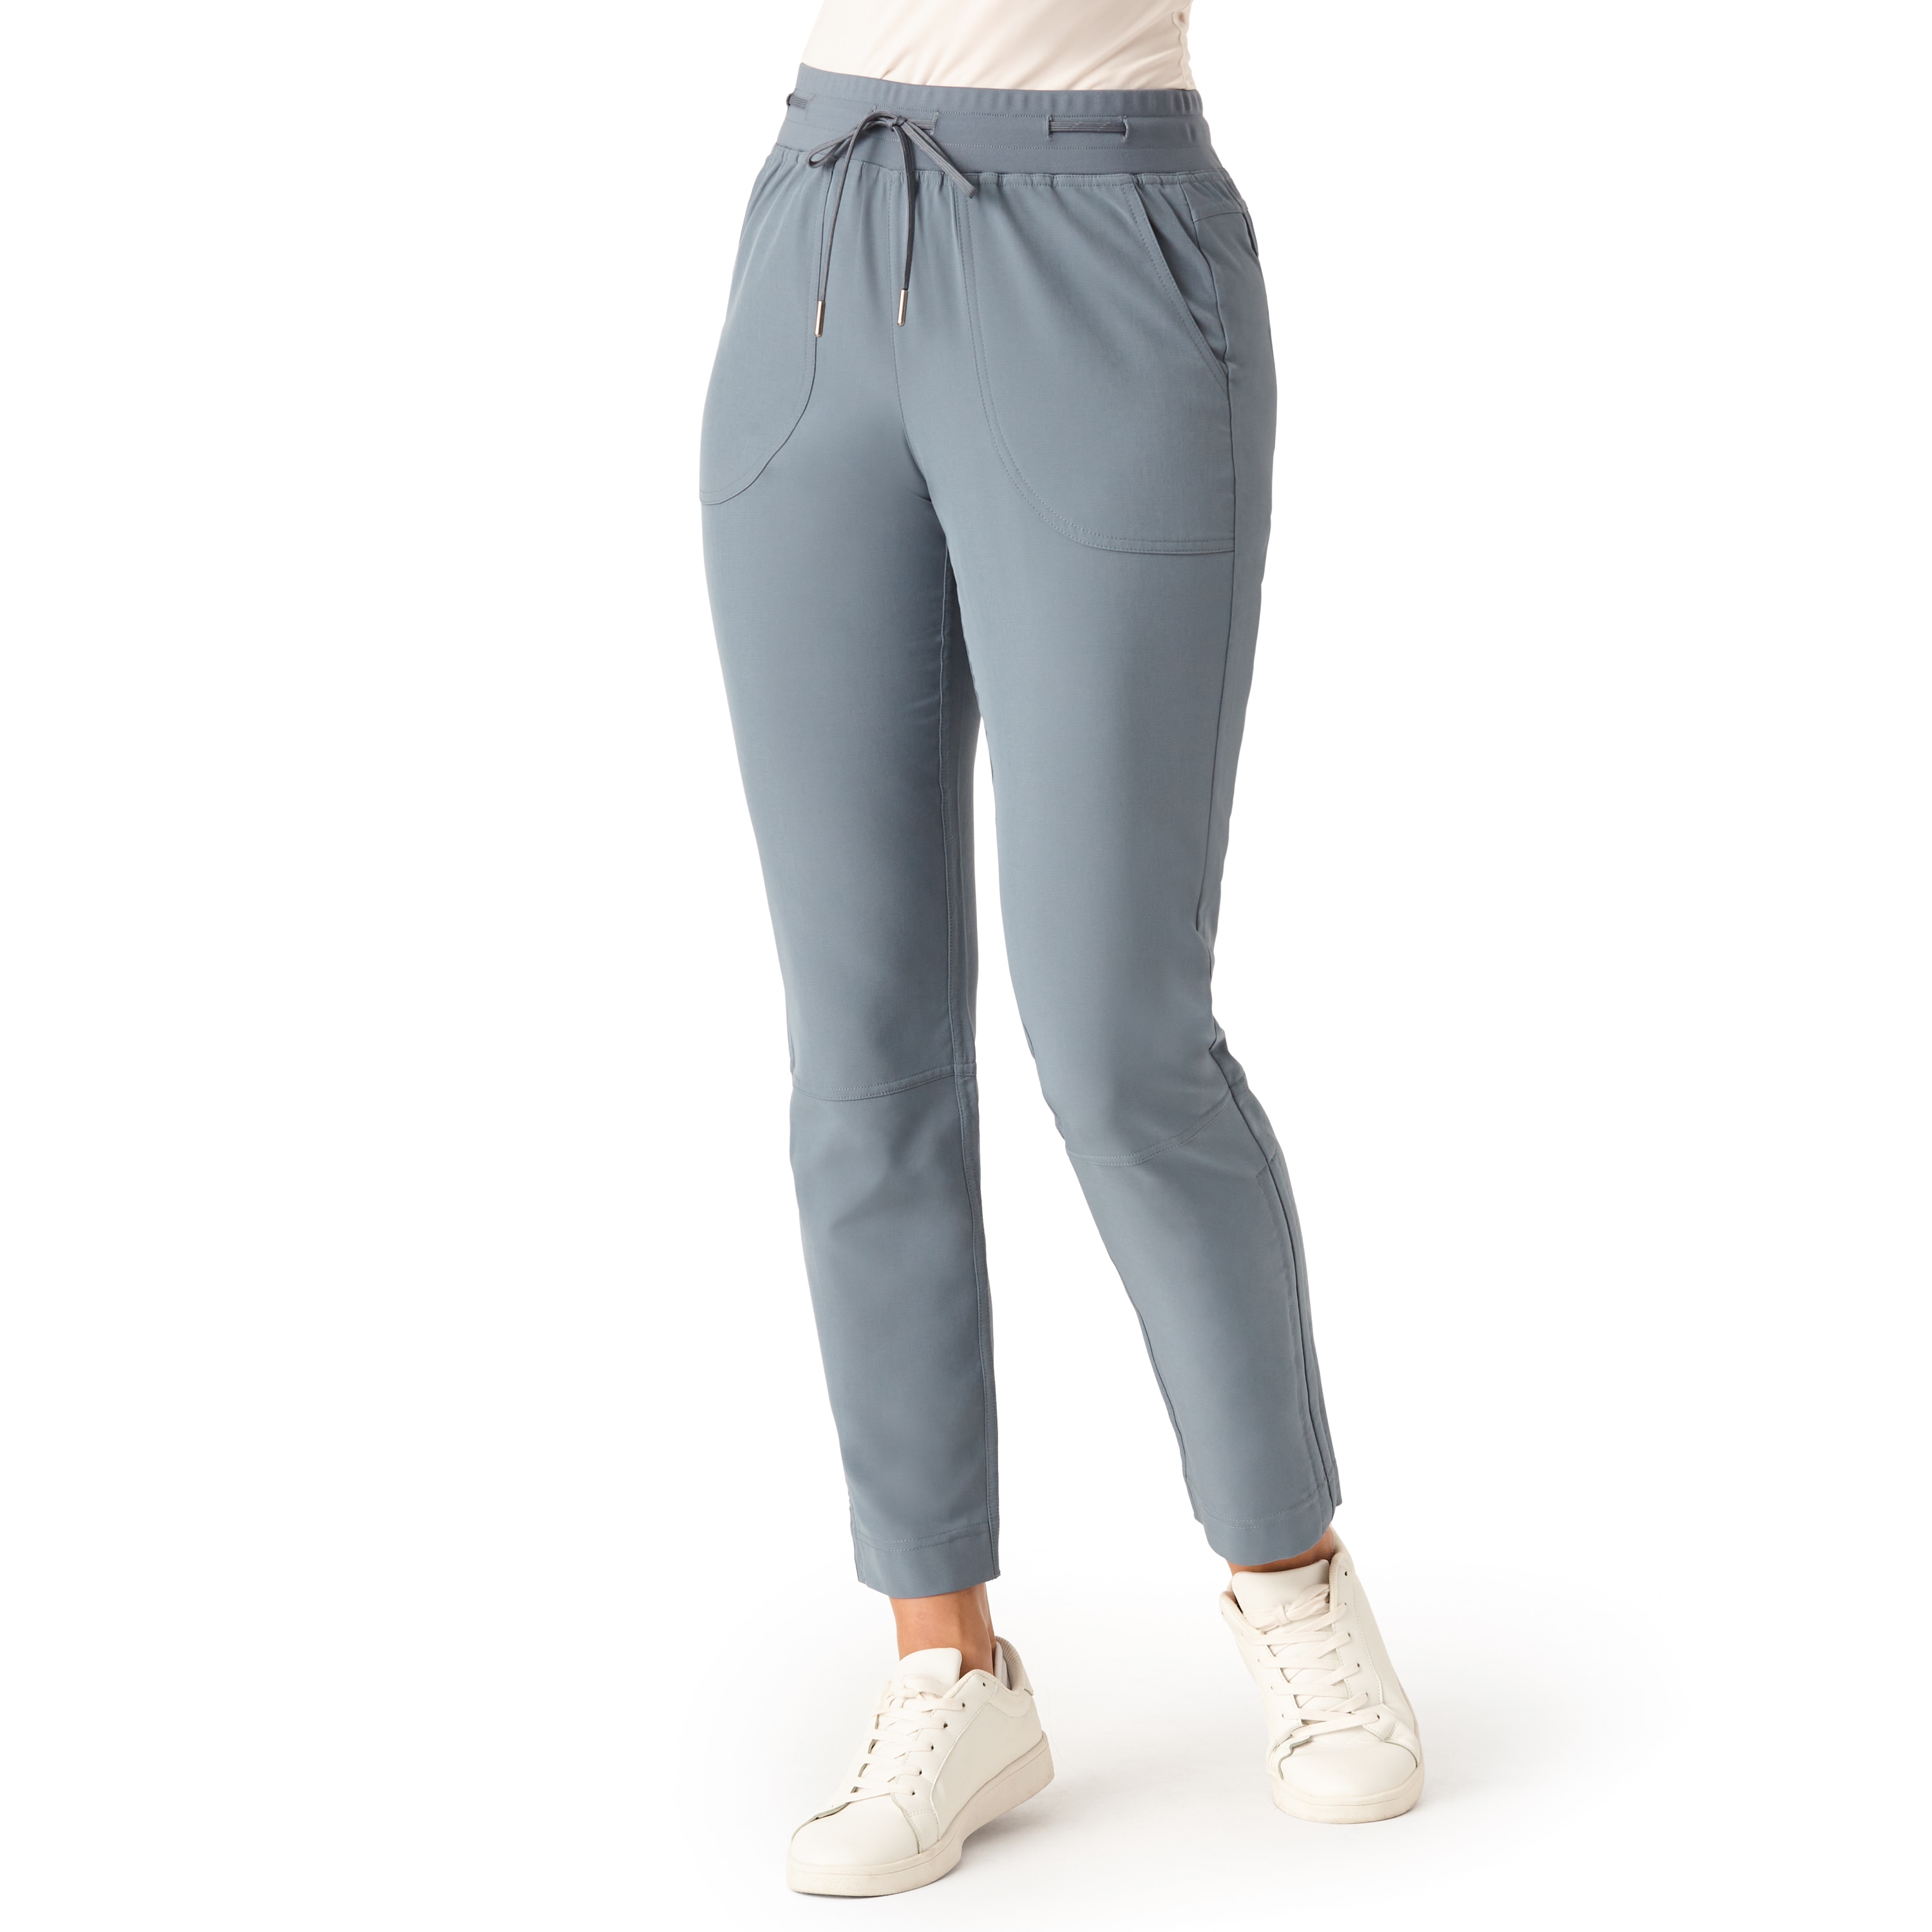 On the Fly Pant 7/8 Length, Women's Trousers